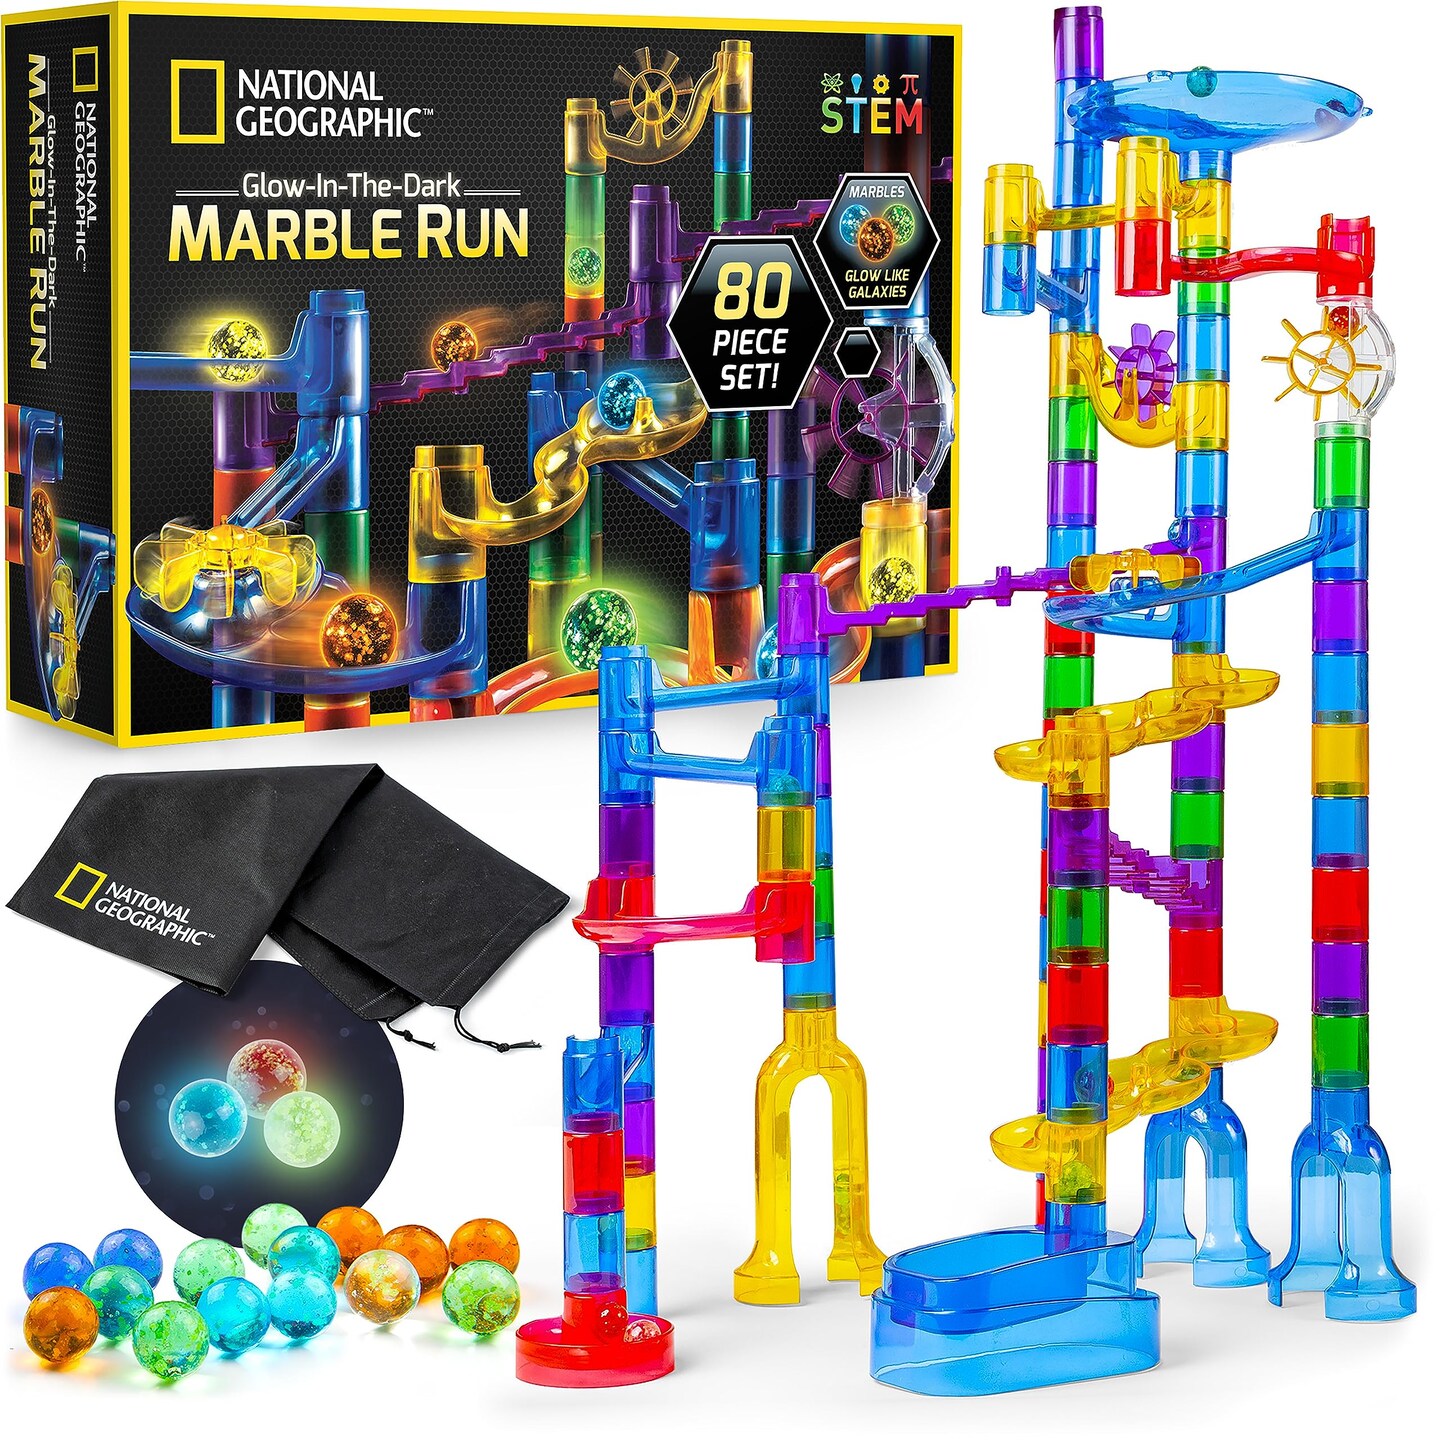 NATIONAL GEOGRAPHIC Glowing Marble Run &#x2013; Construction Set with 15 Glow in the Dark Glass Marbles &#x26; Storage Bag, STEM Gifts for Boys and Girls, Building Project Toy (Amazon Exclusive)